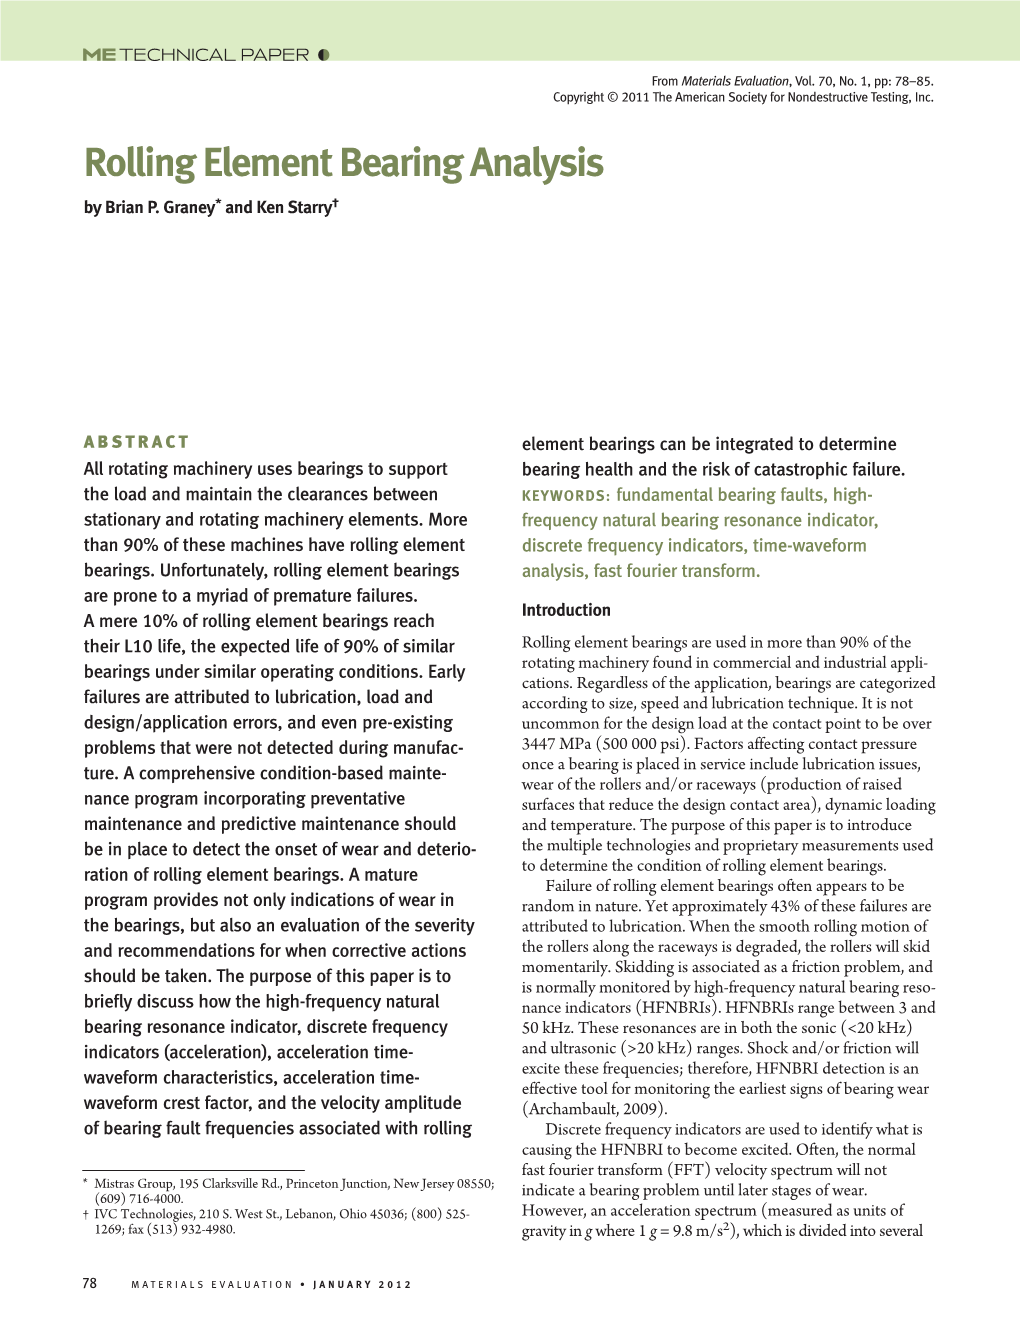 Rolling Element Bearing Analysis by Brian P